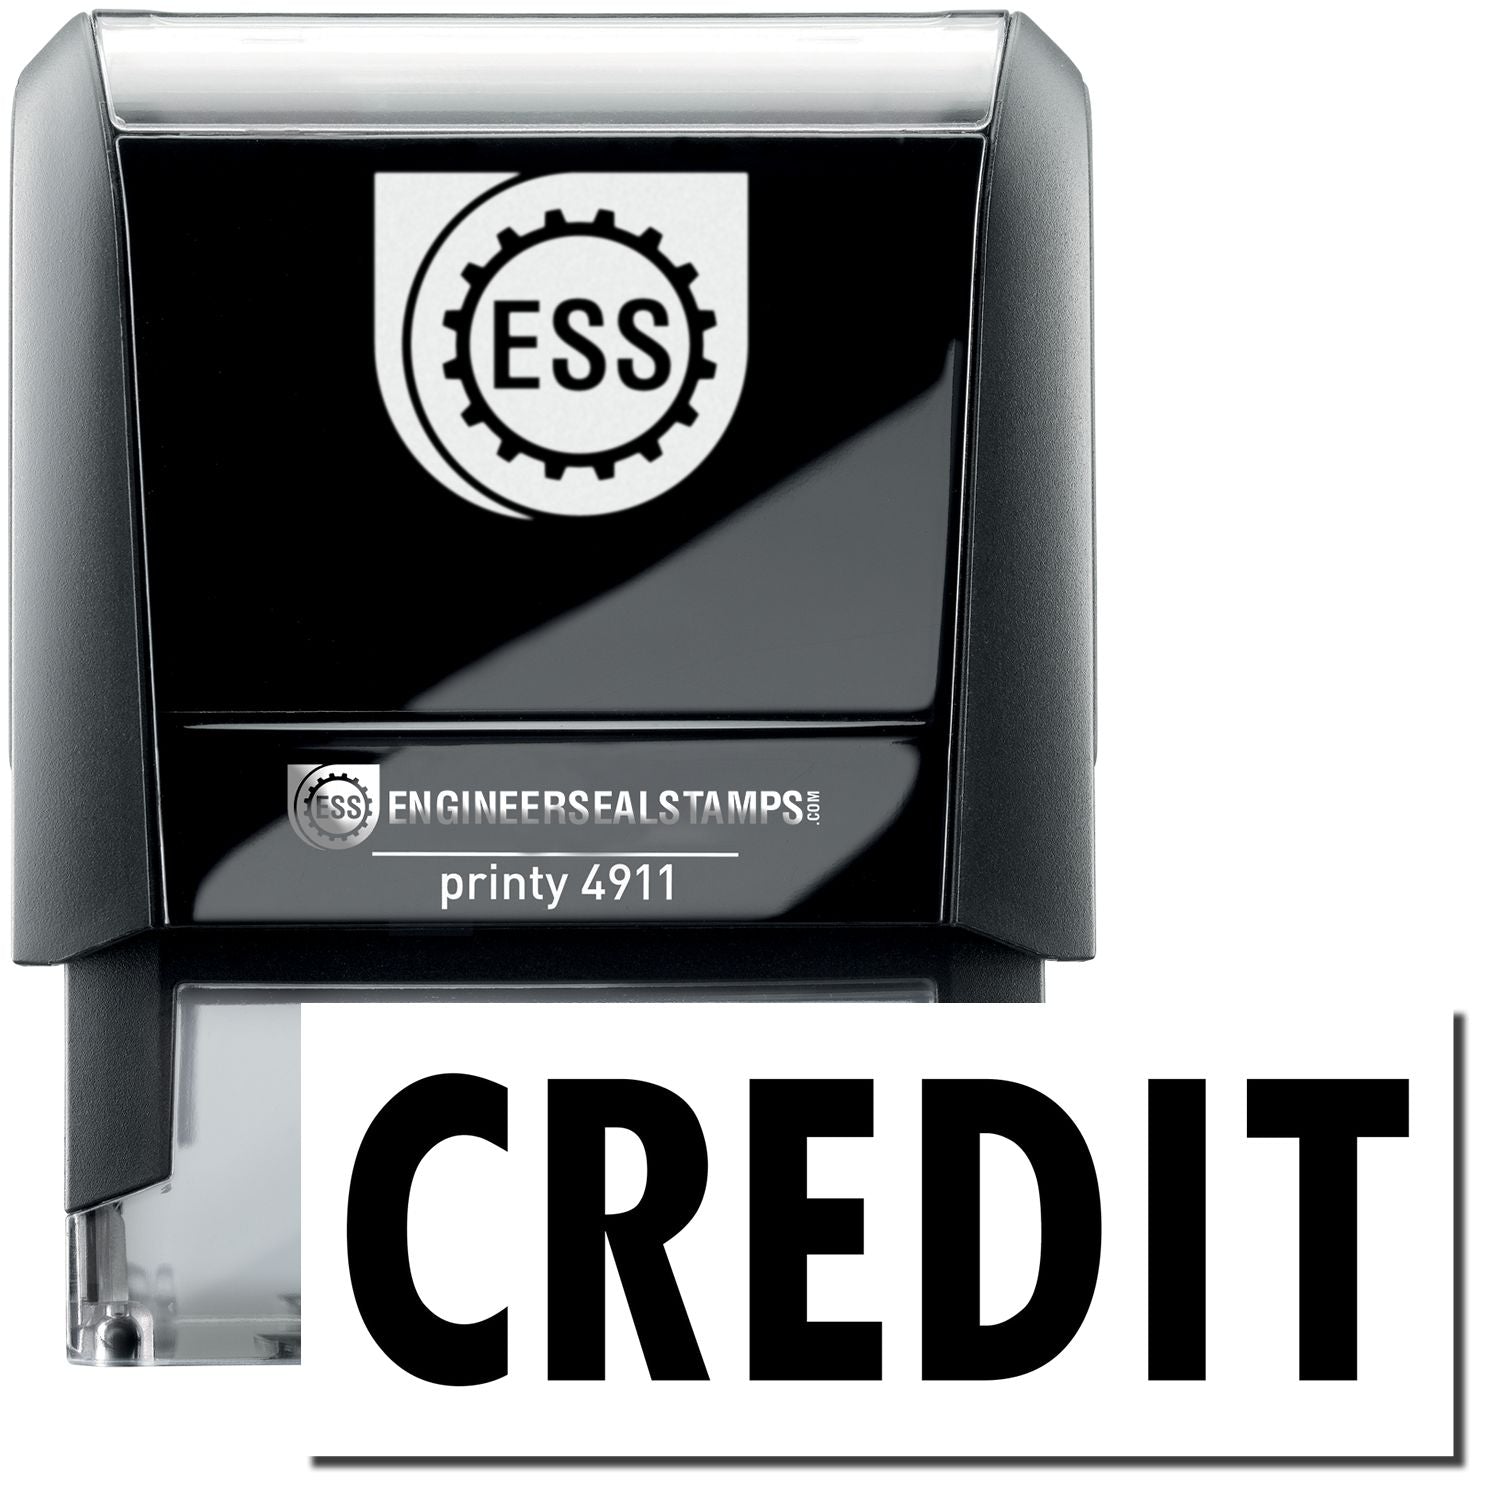 A self-inking stamp with a stamped image showing how the text "CREDIT" is displayed after stamping.